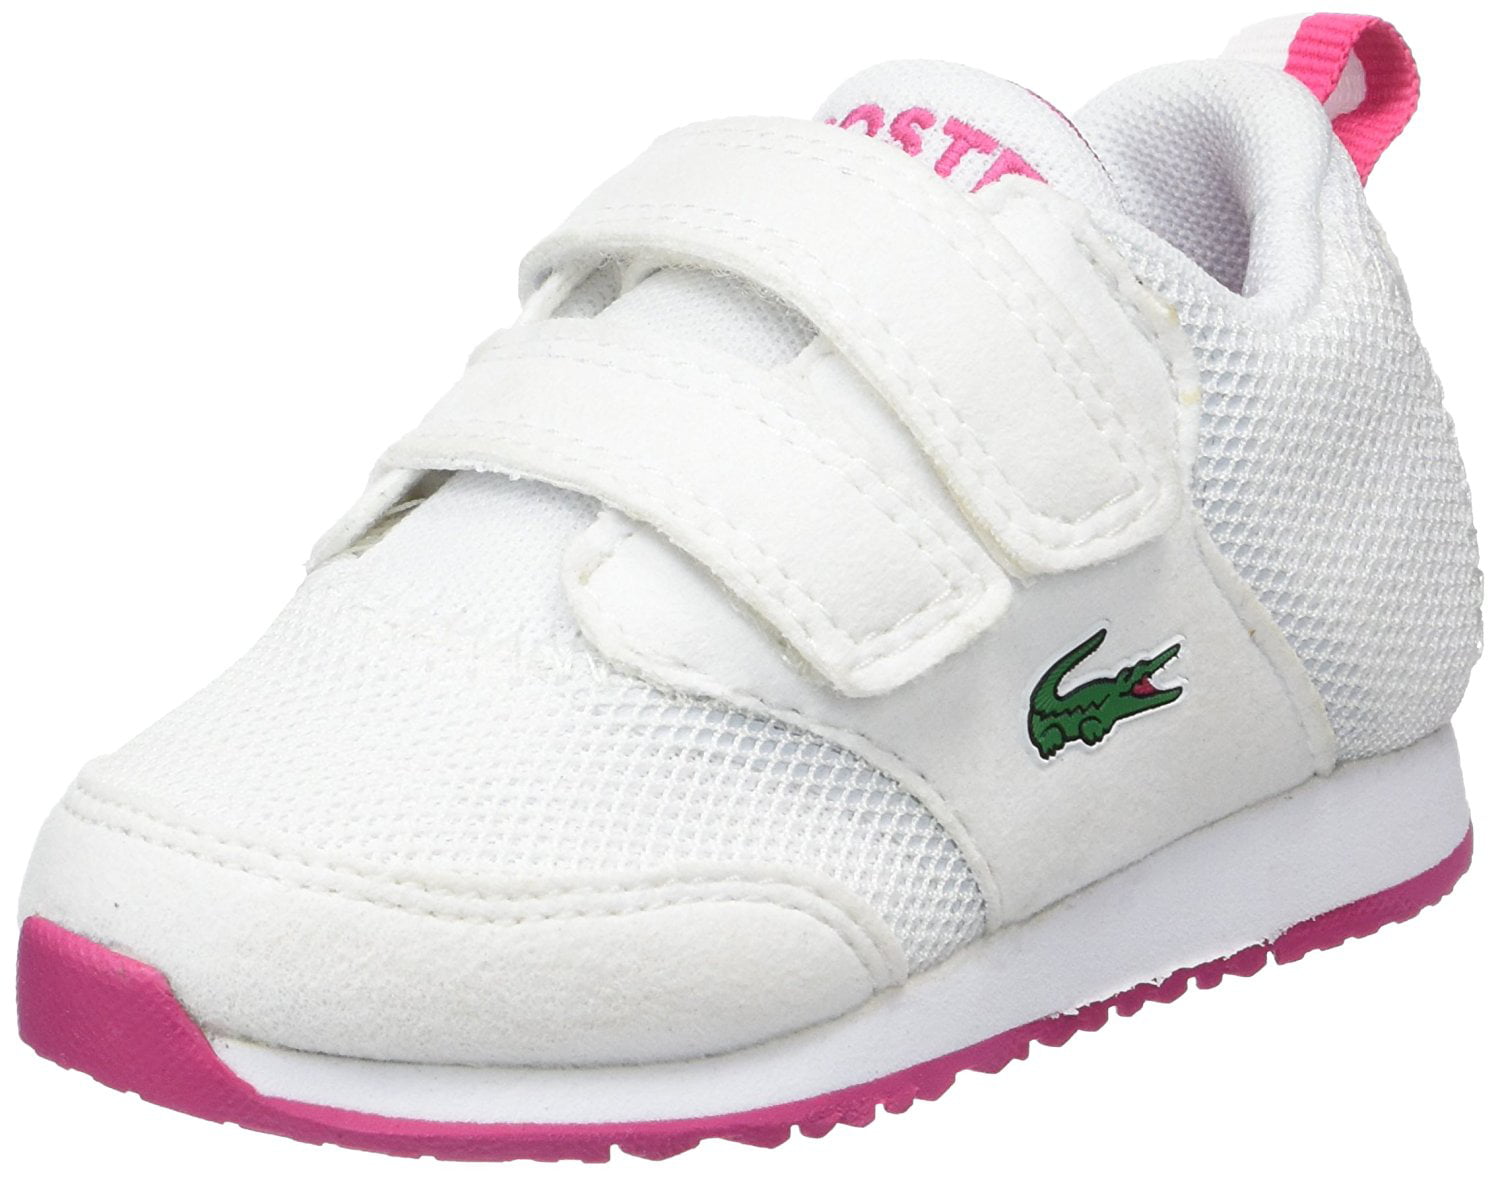 lacoste shoes for toddler girl